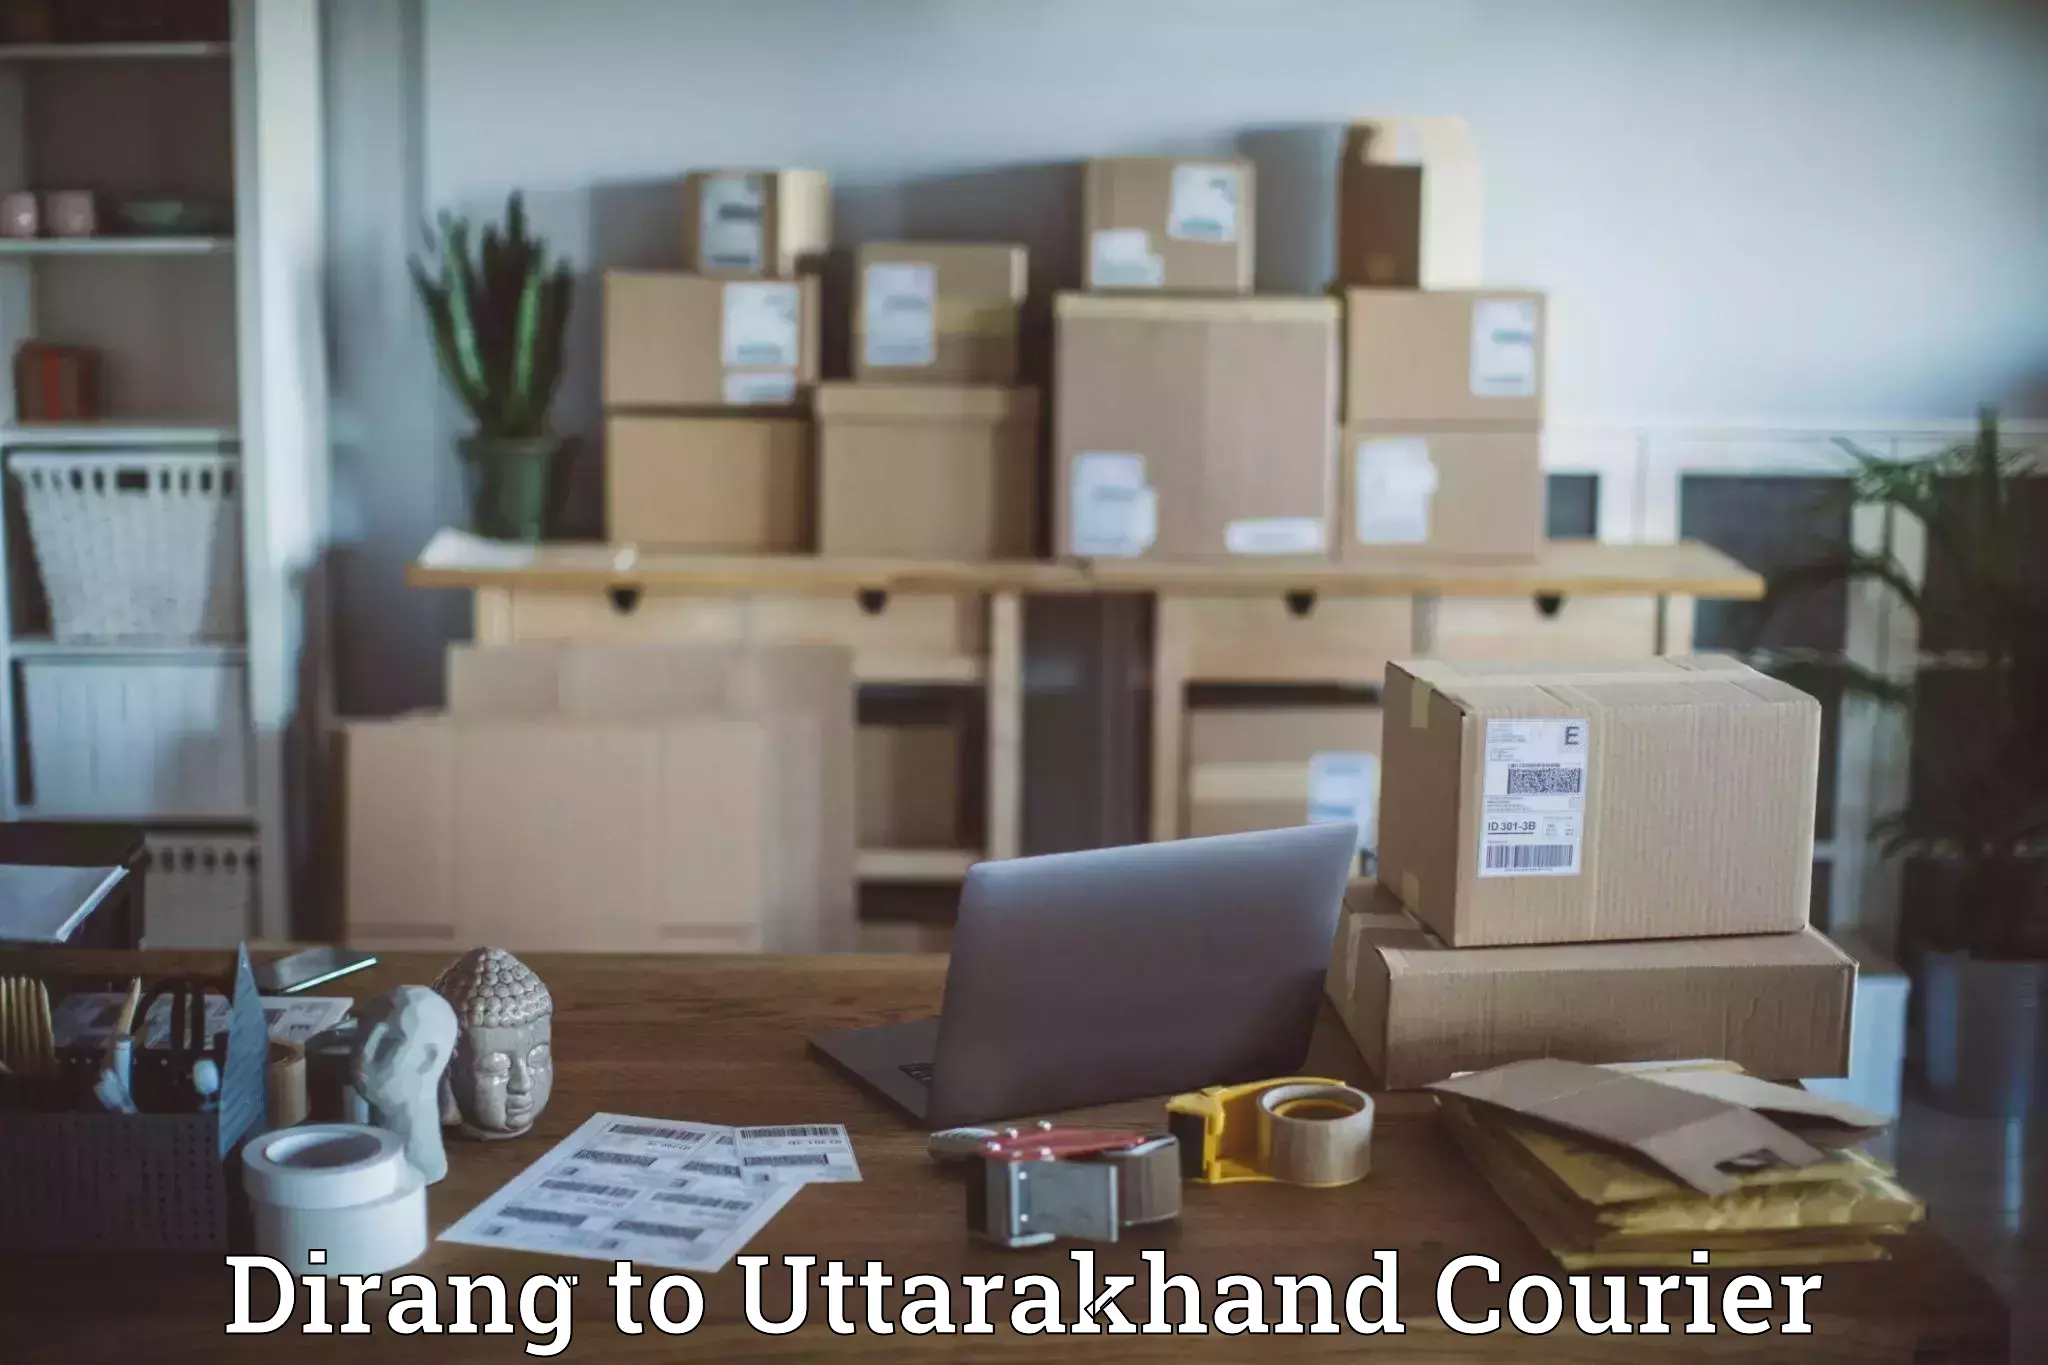 Pharmaceutical courier Dirang to IIT Roorkee